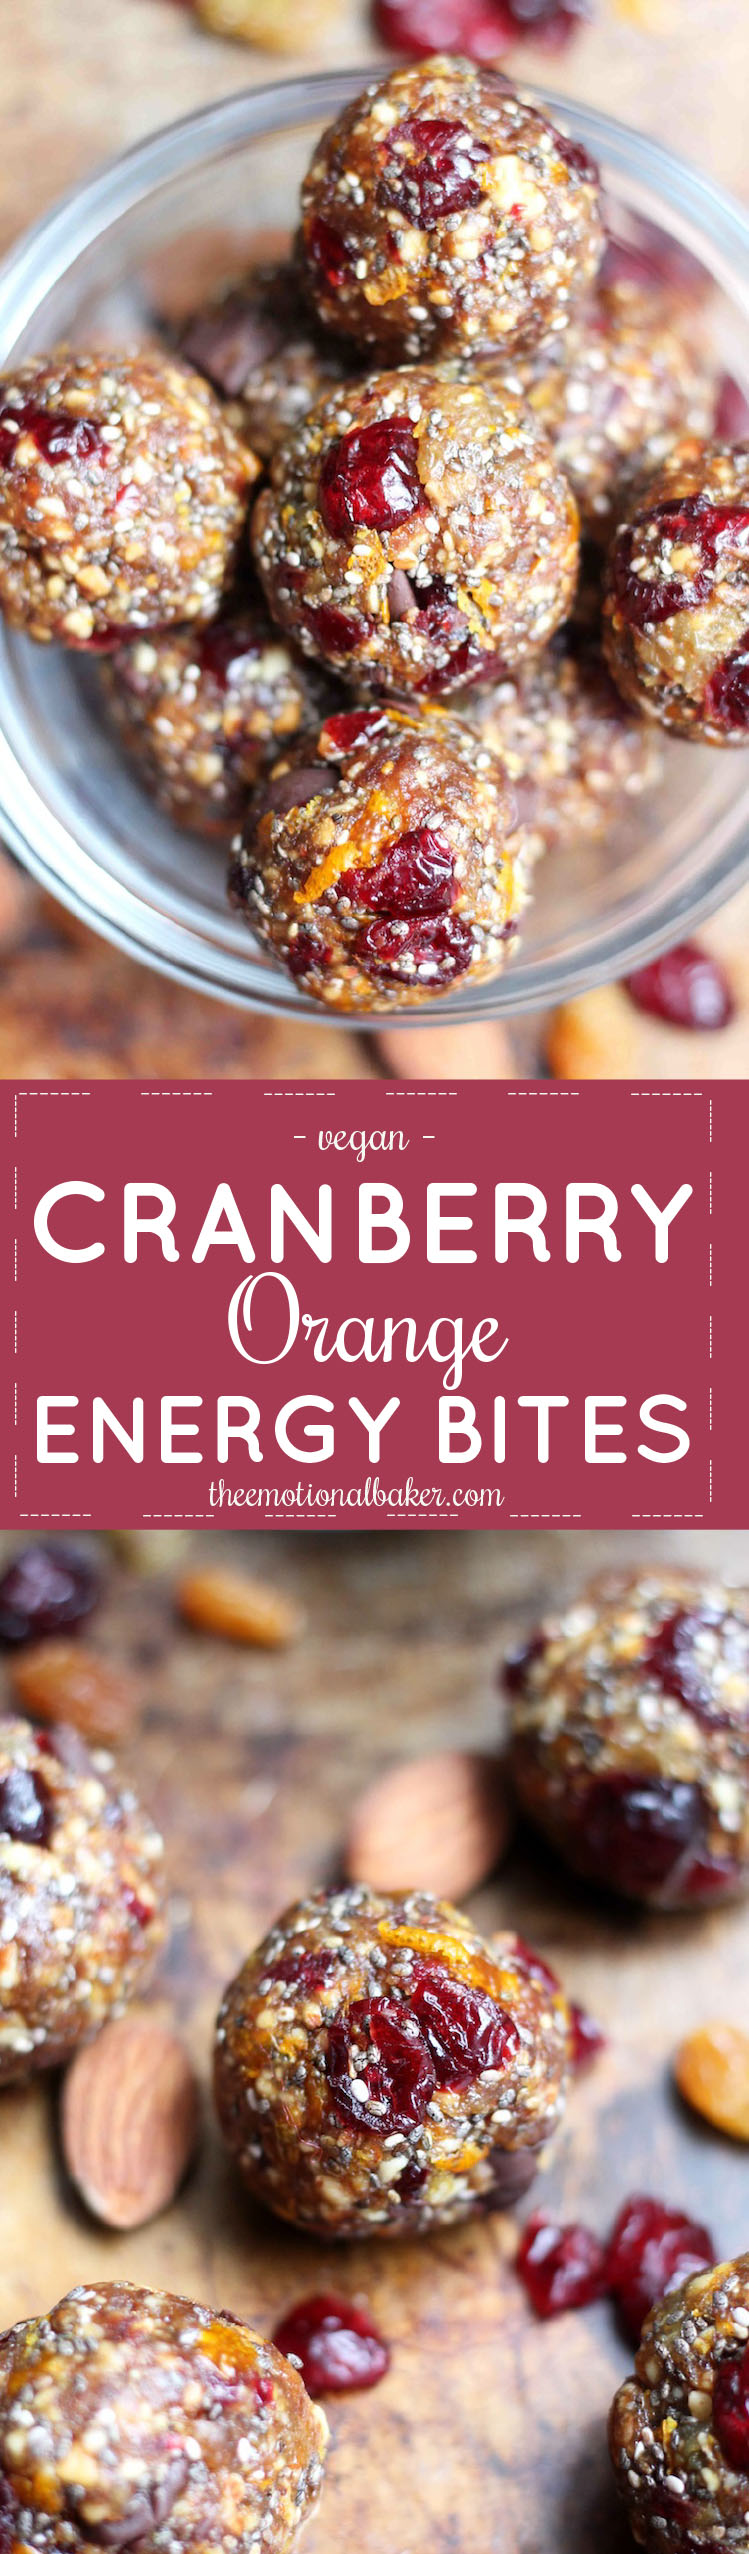 These Cranberry Orange Energy Bites have bright, bold flavor that will give you a jolt for studying, exercising & everything in between.